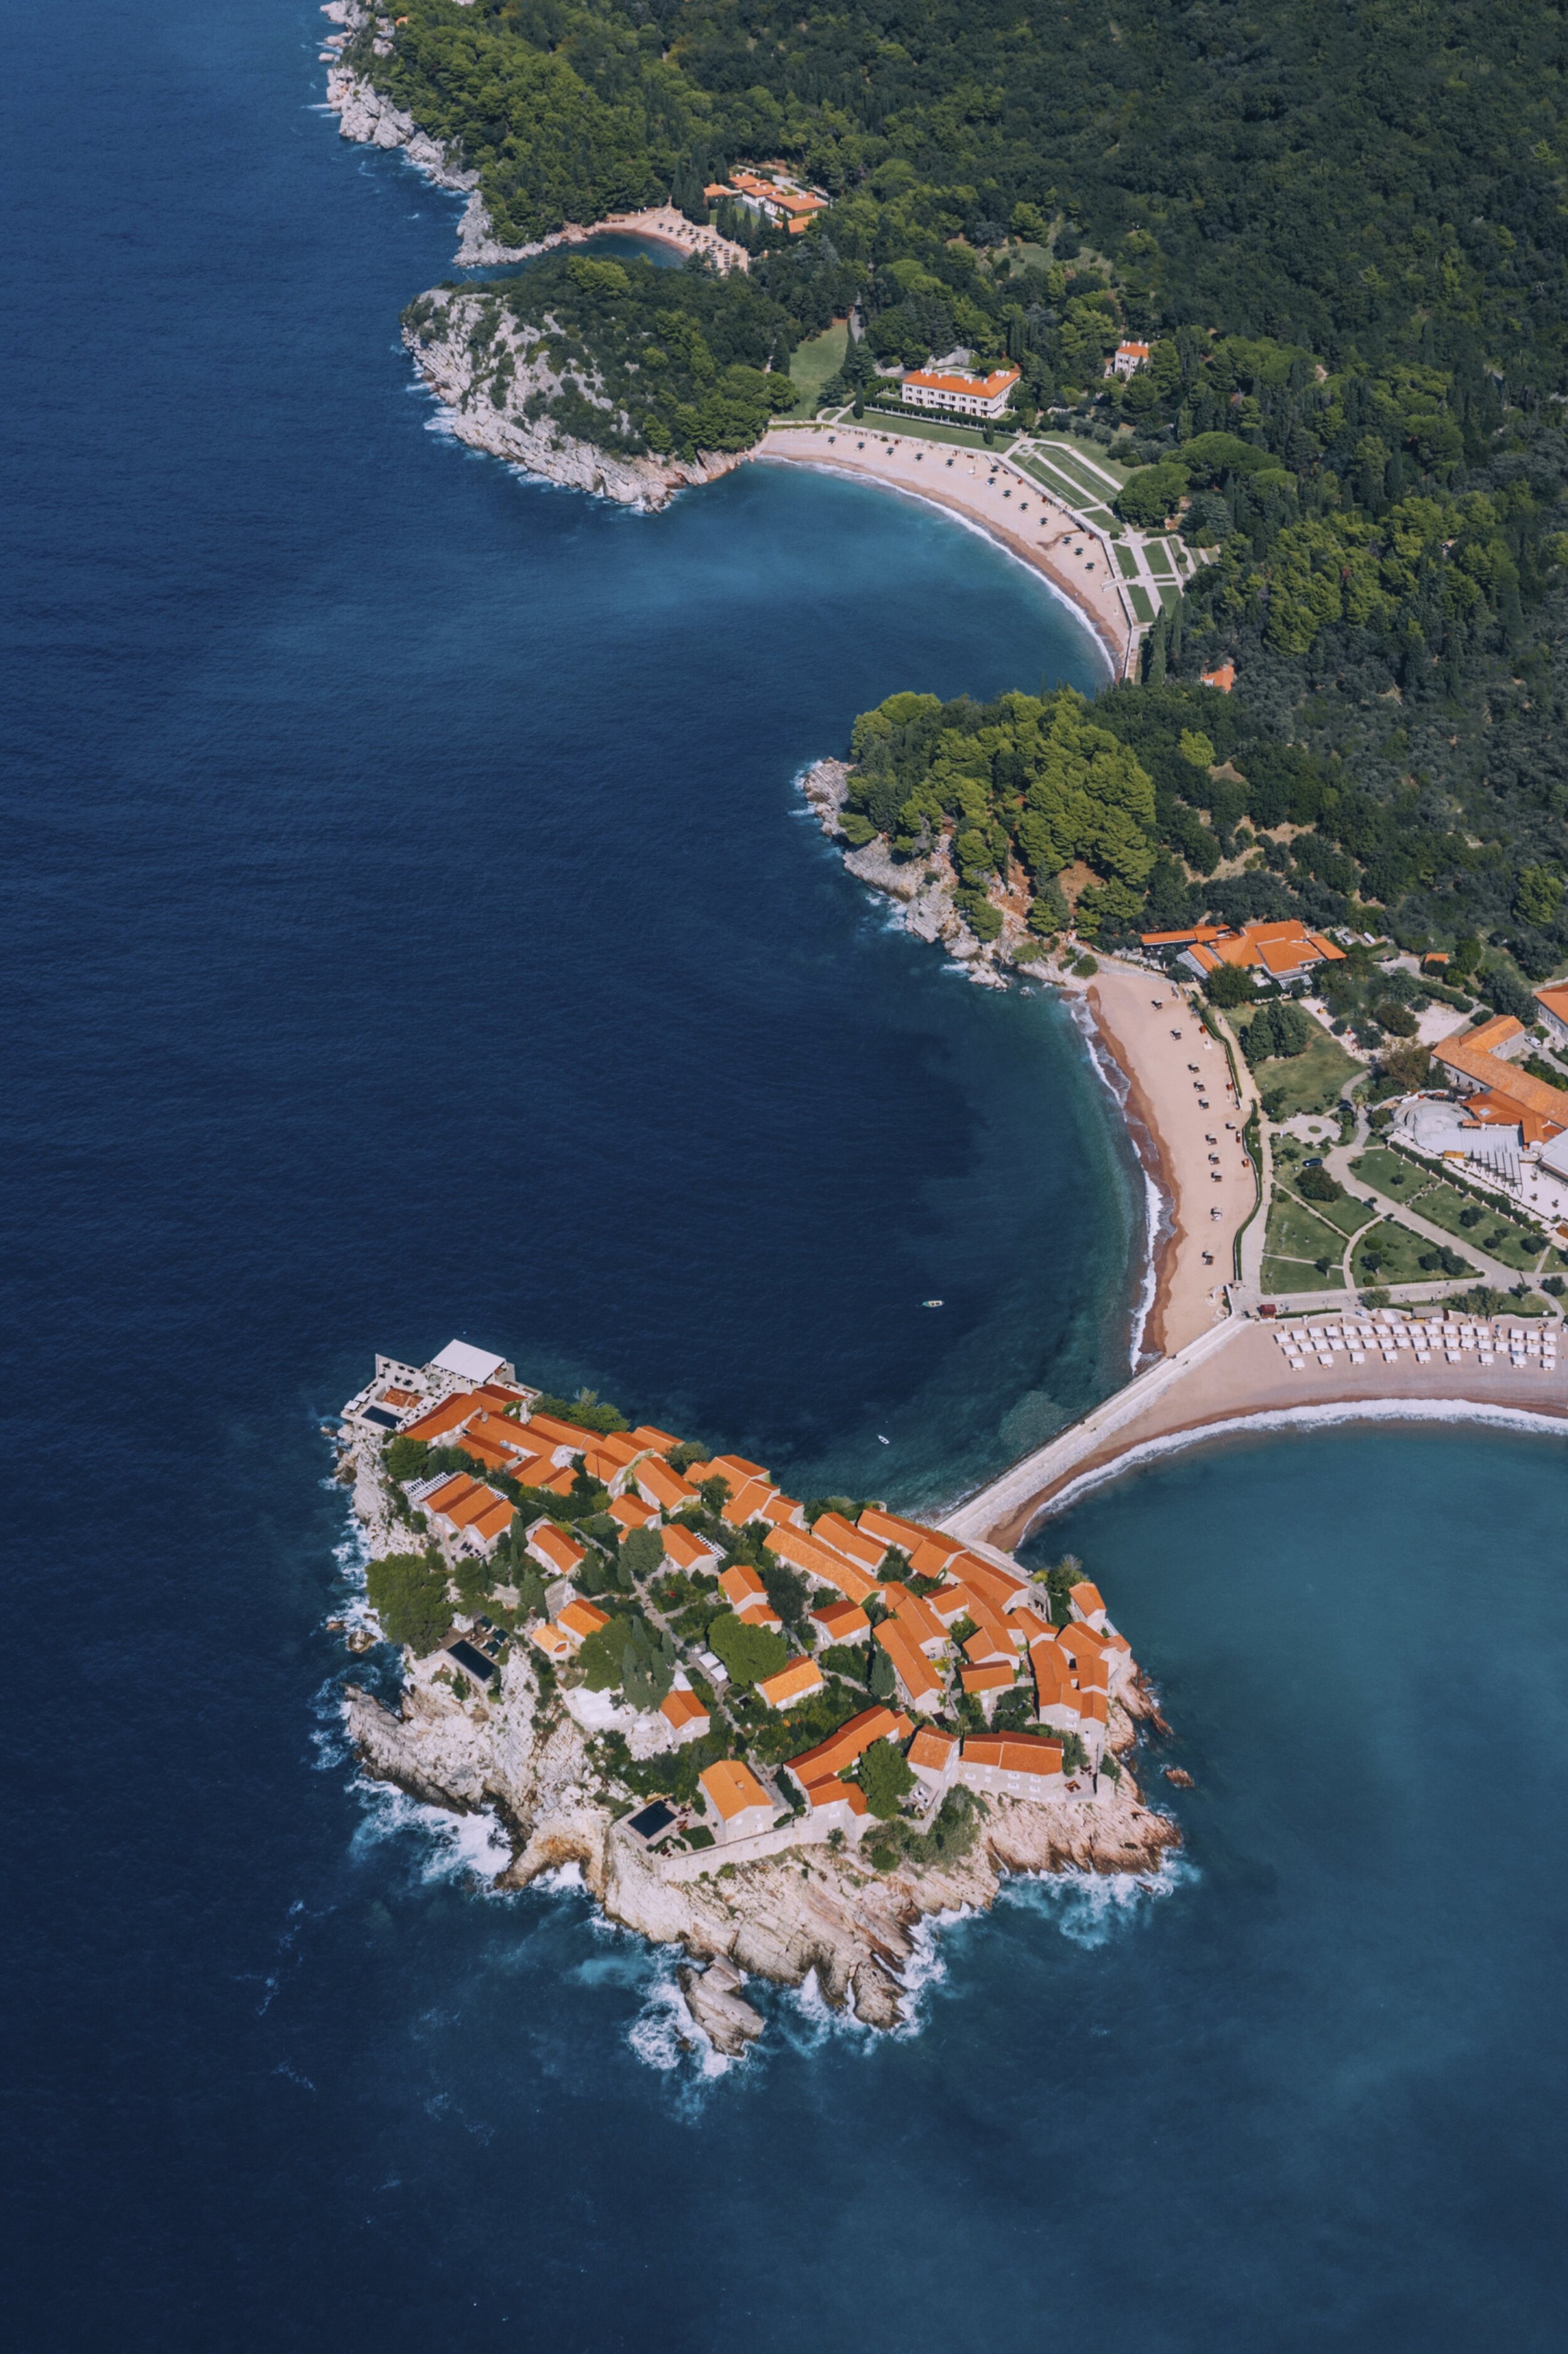 Aman-sveti-stefan-luxury-resorts-clothes-and-water.jpg